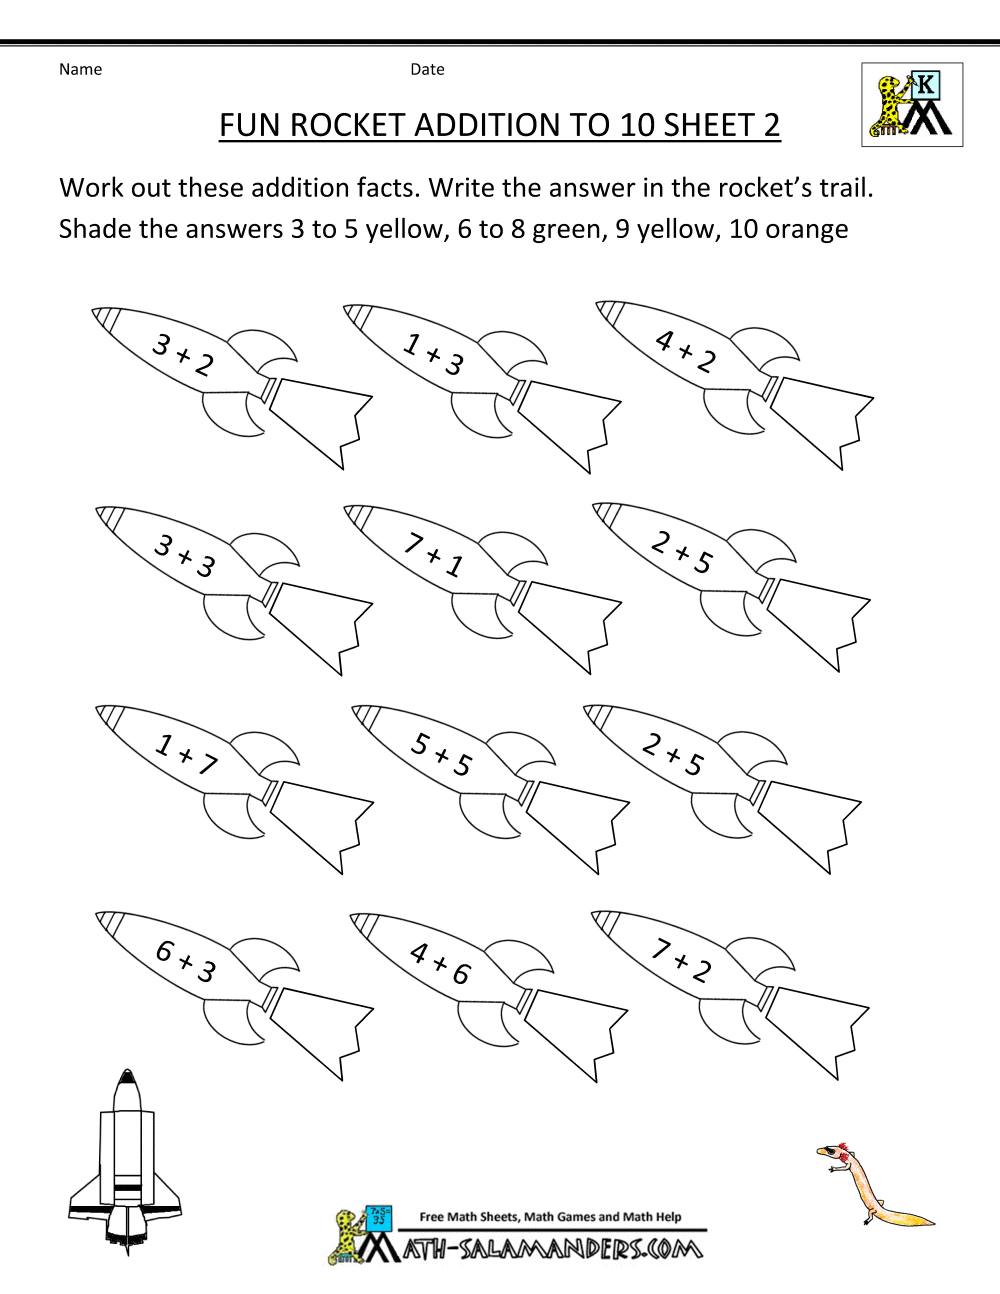 math-coloring-pages-for-kindergarten-coloring-home